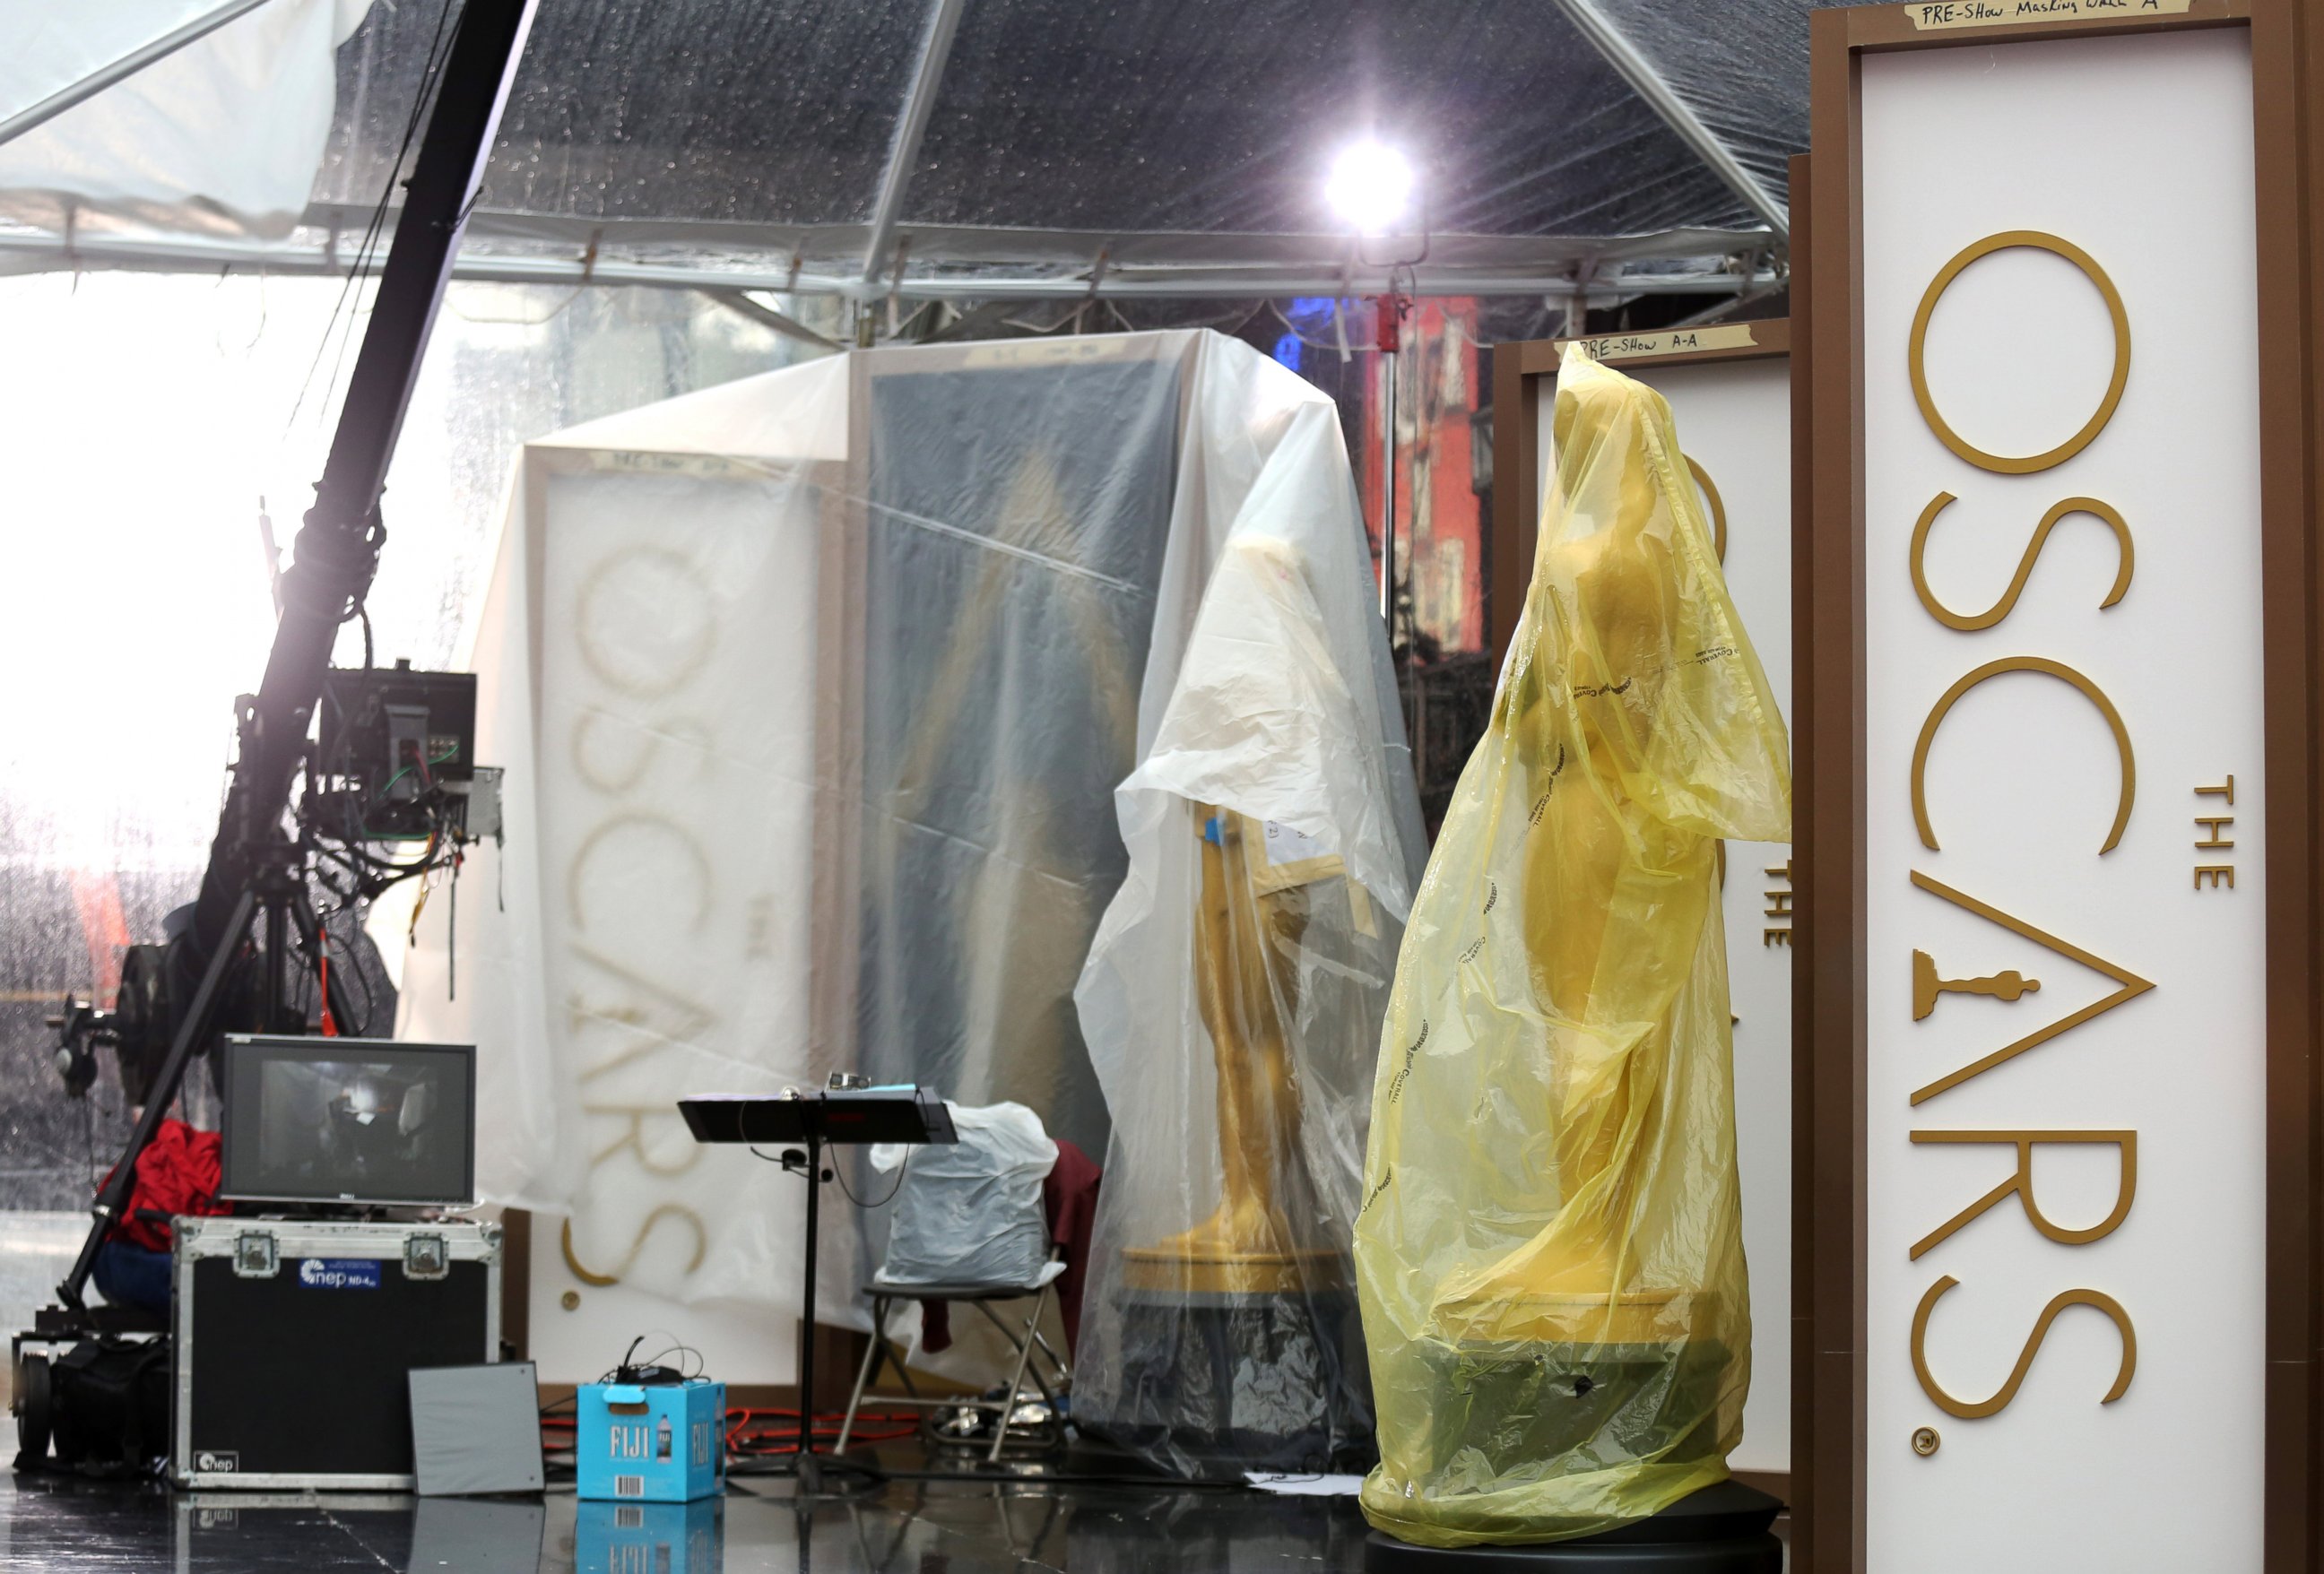 PHOTO: A pair of Oscar statues are seen on the red carpet as preparations are made during rainy weather for the 86th Academy Awards in Los Angeles, Friday, Feb. 28, 2014.